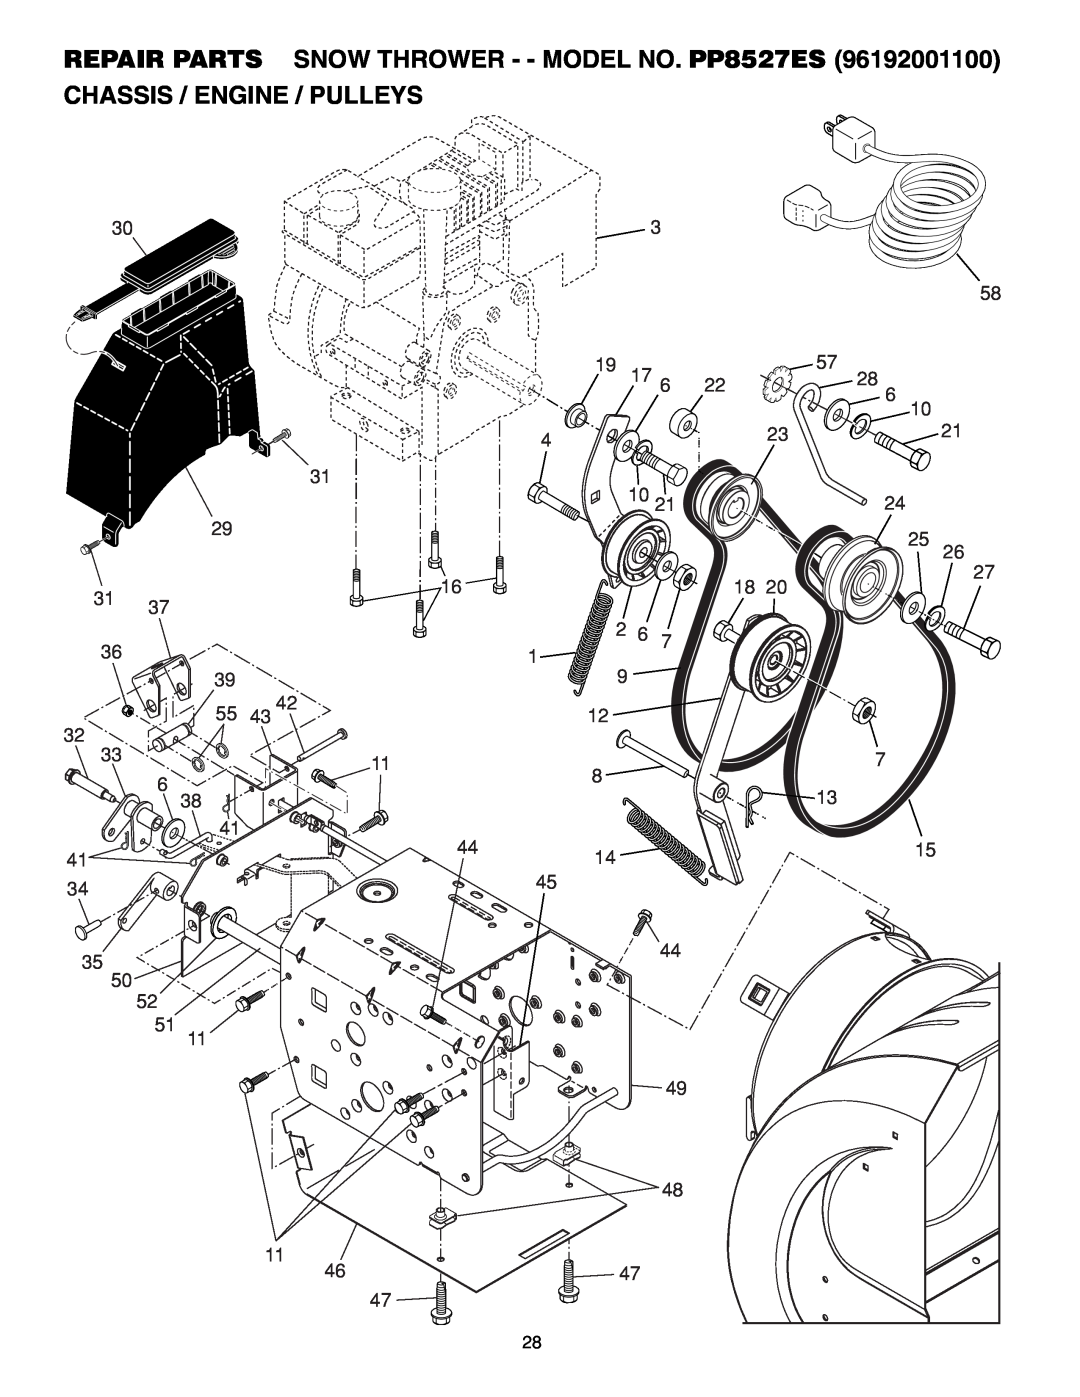 Poulan owner manual Chassis / Engine / Pulleys, REPAIR PARTS SNOW THROWER - - MODEL NO. PP8527ES 